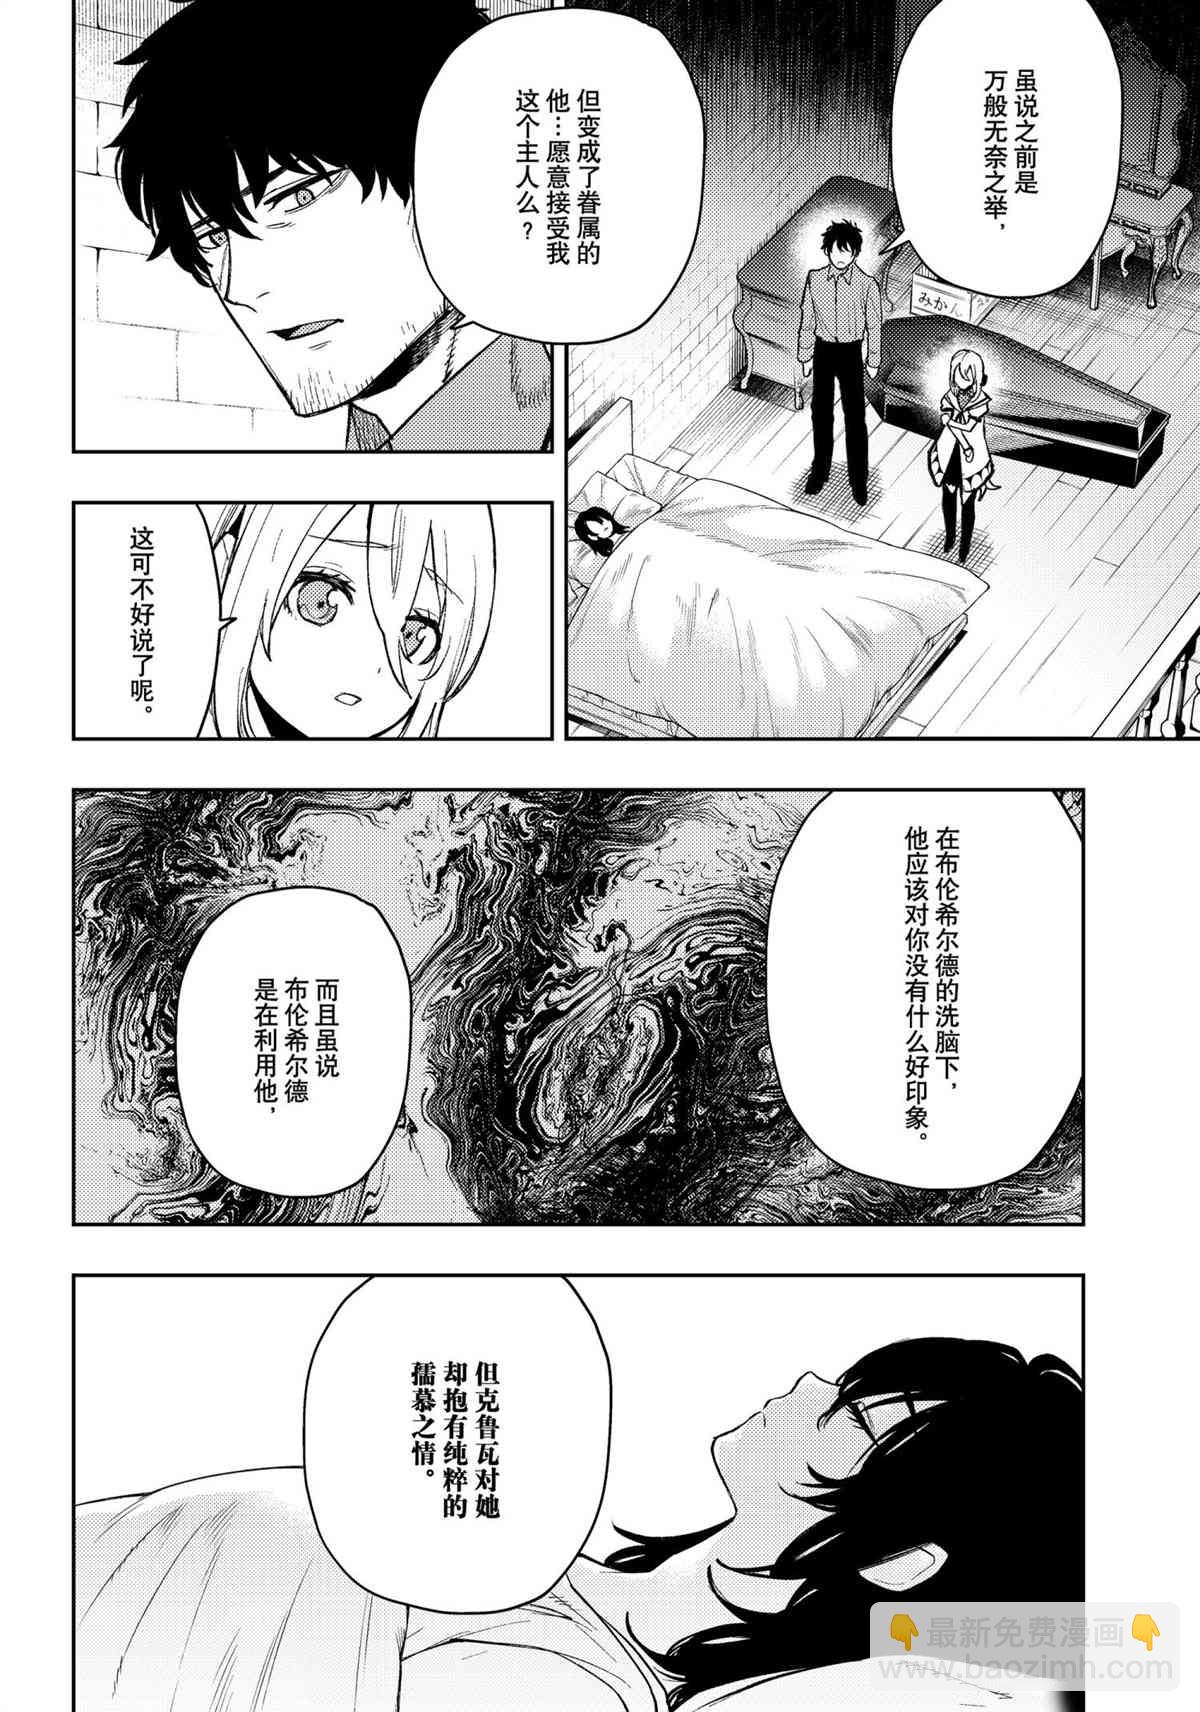 MoMo-the blood taker - 第91話 - 4